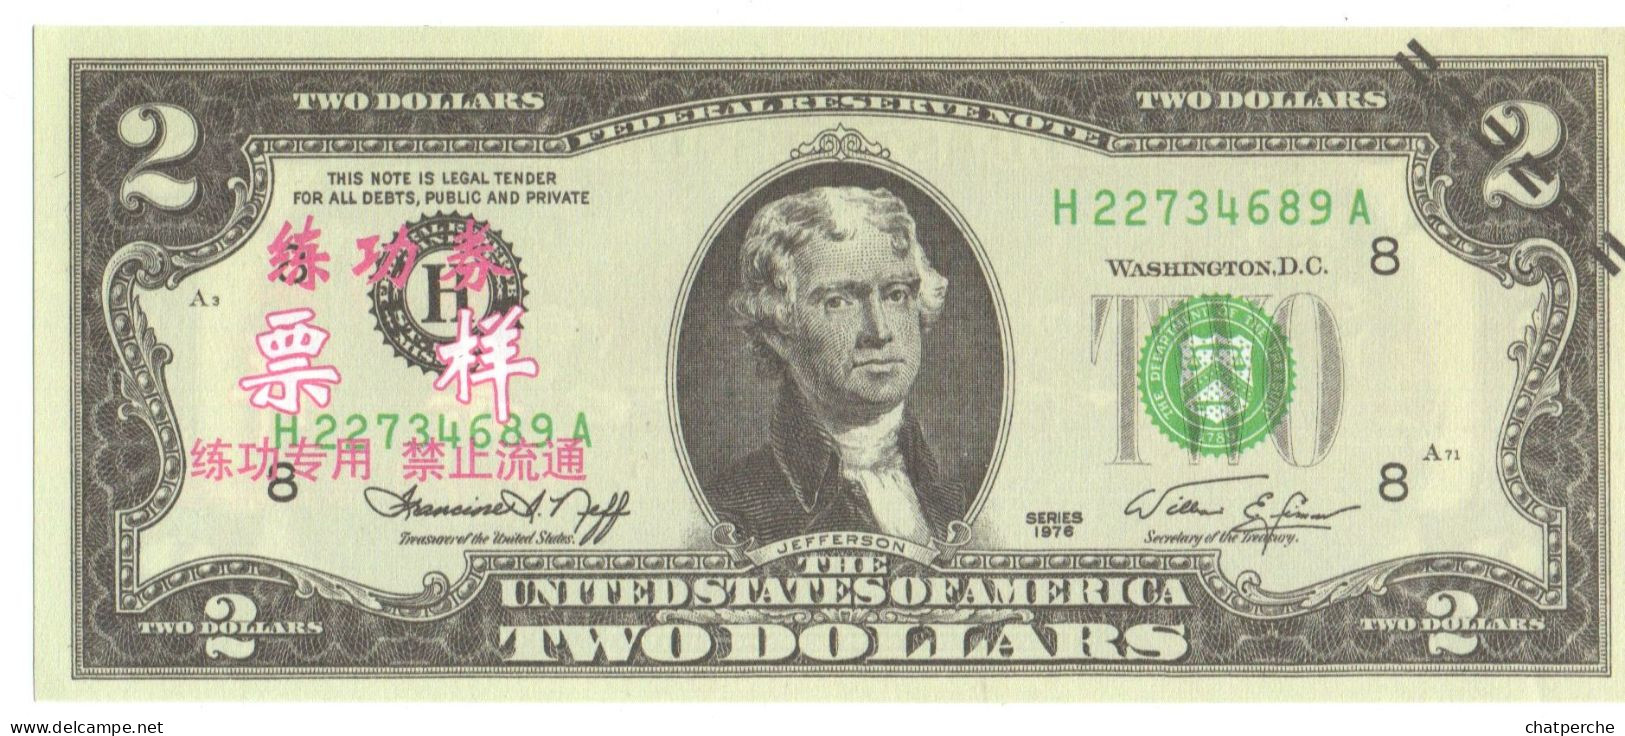 POUR COLLECTIONNEUR FAUX-BILLET FAKE 2 TWO DOLLARS THOMAS JEFFERSON USA THE UNITED STATES OF AMERICA - Erreurs